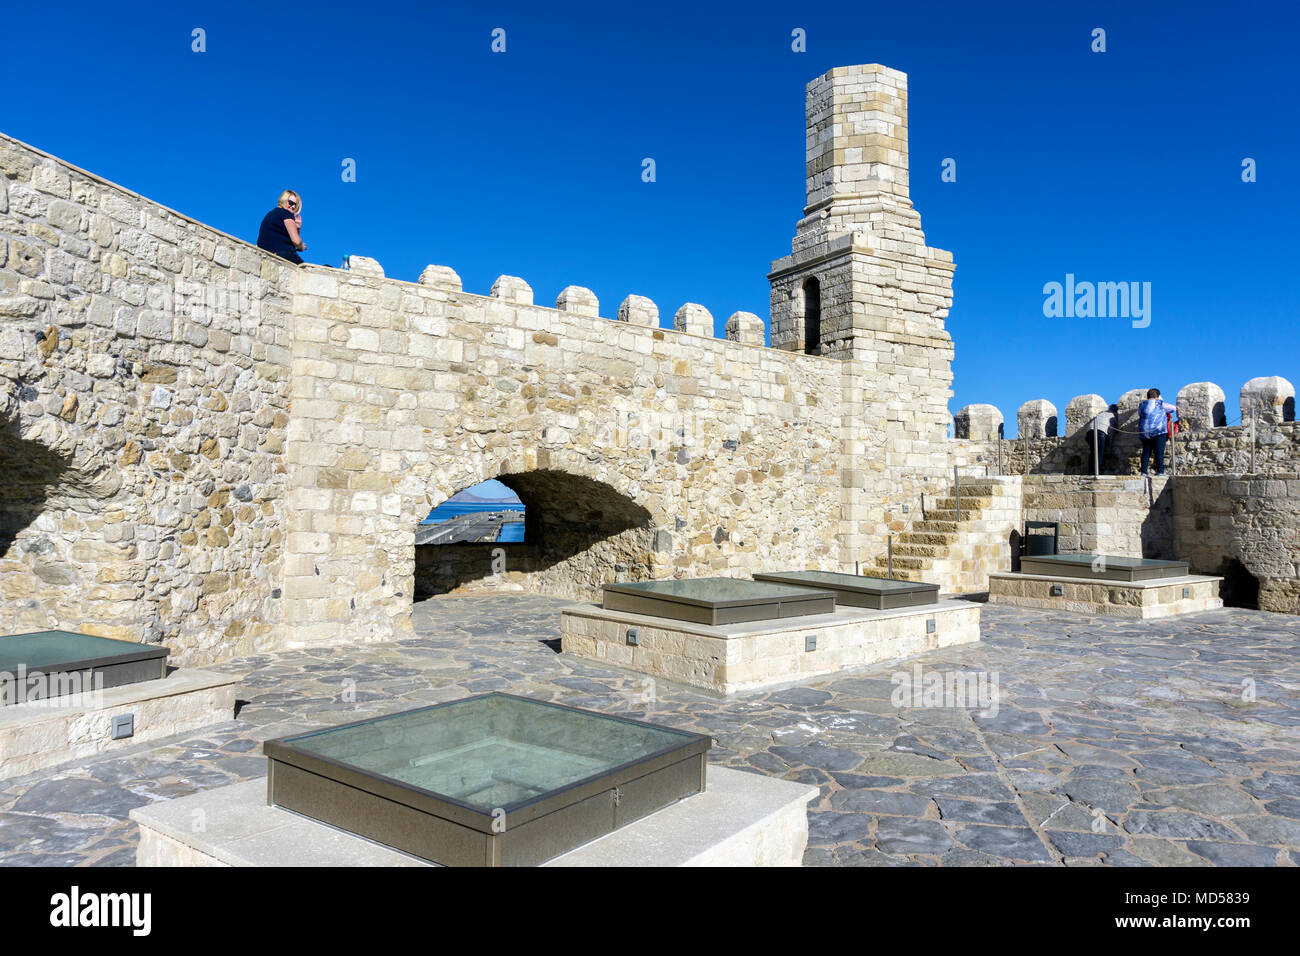 Heraklion, Crete Island / Greece - November 22, 2017: Rooftop view of the fortress Koules with the old lighthouse Stock Photo